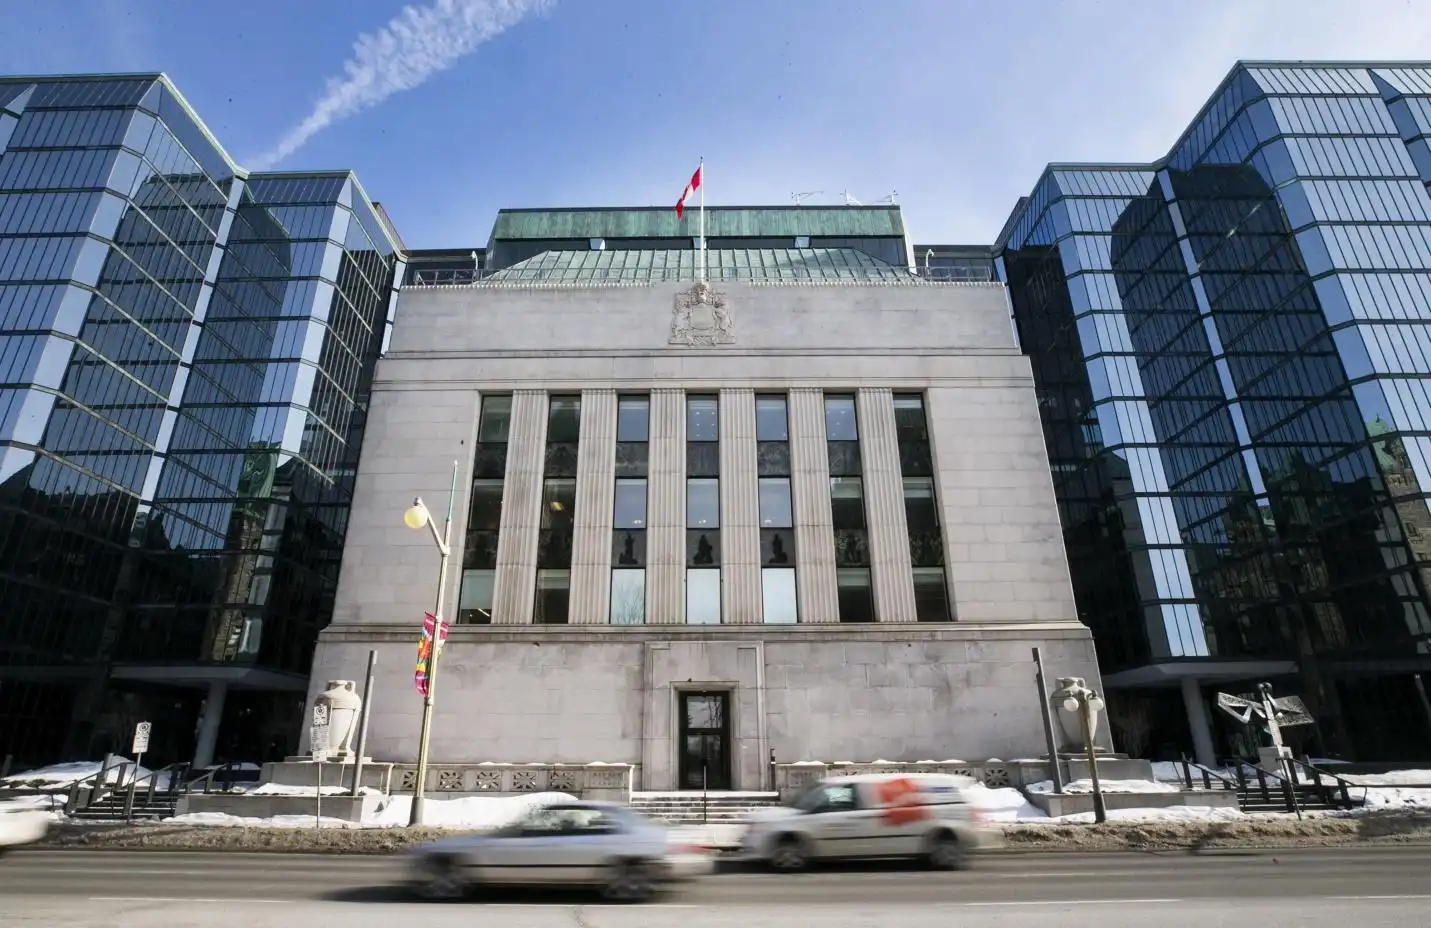 Learn about the Bank of Canada's role, functions and influence on the national economy